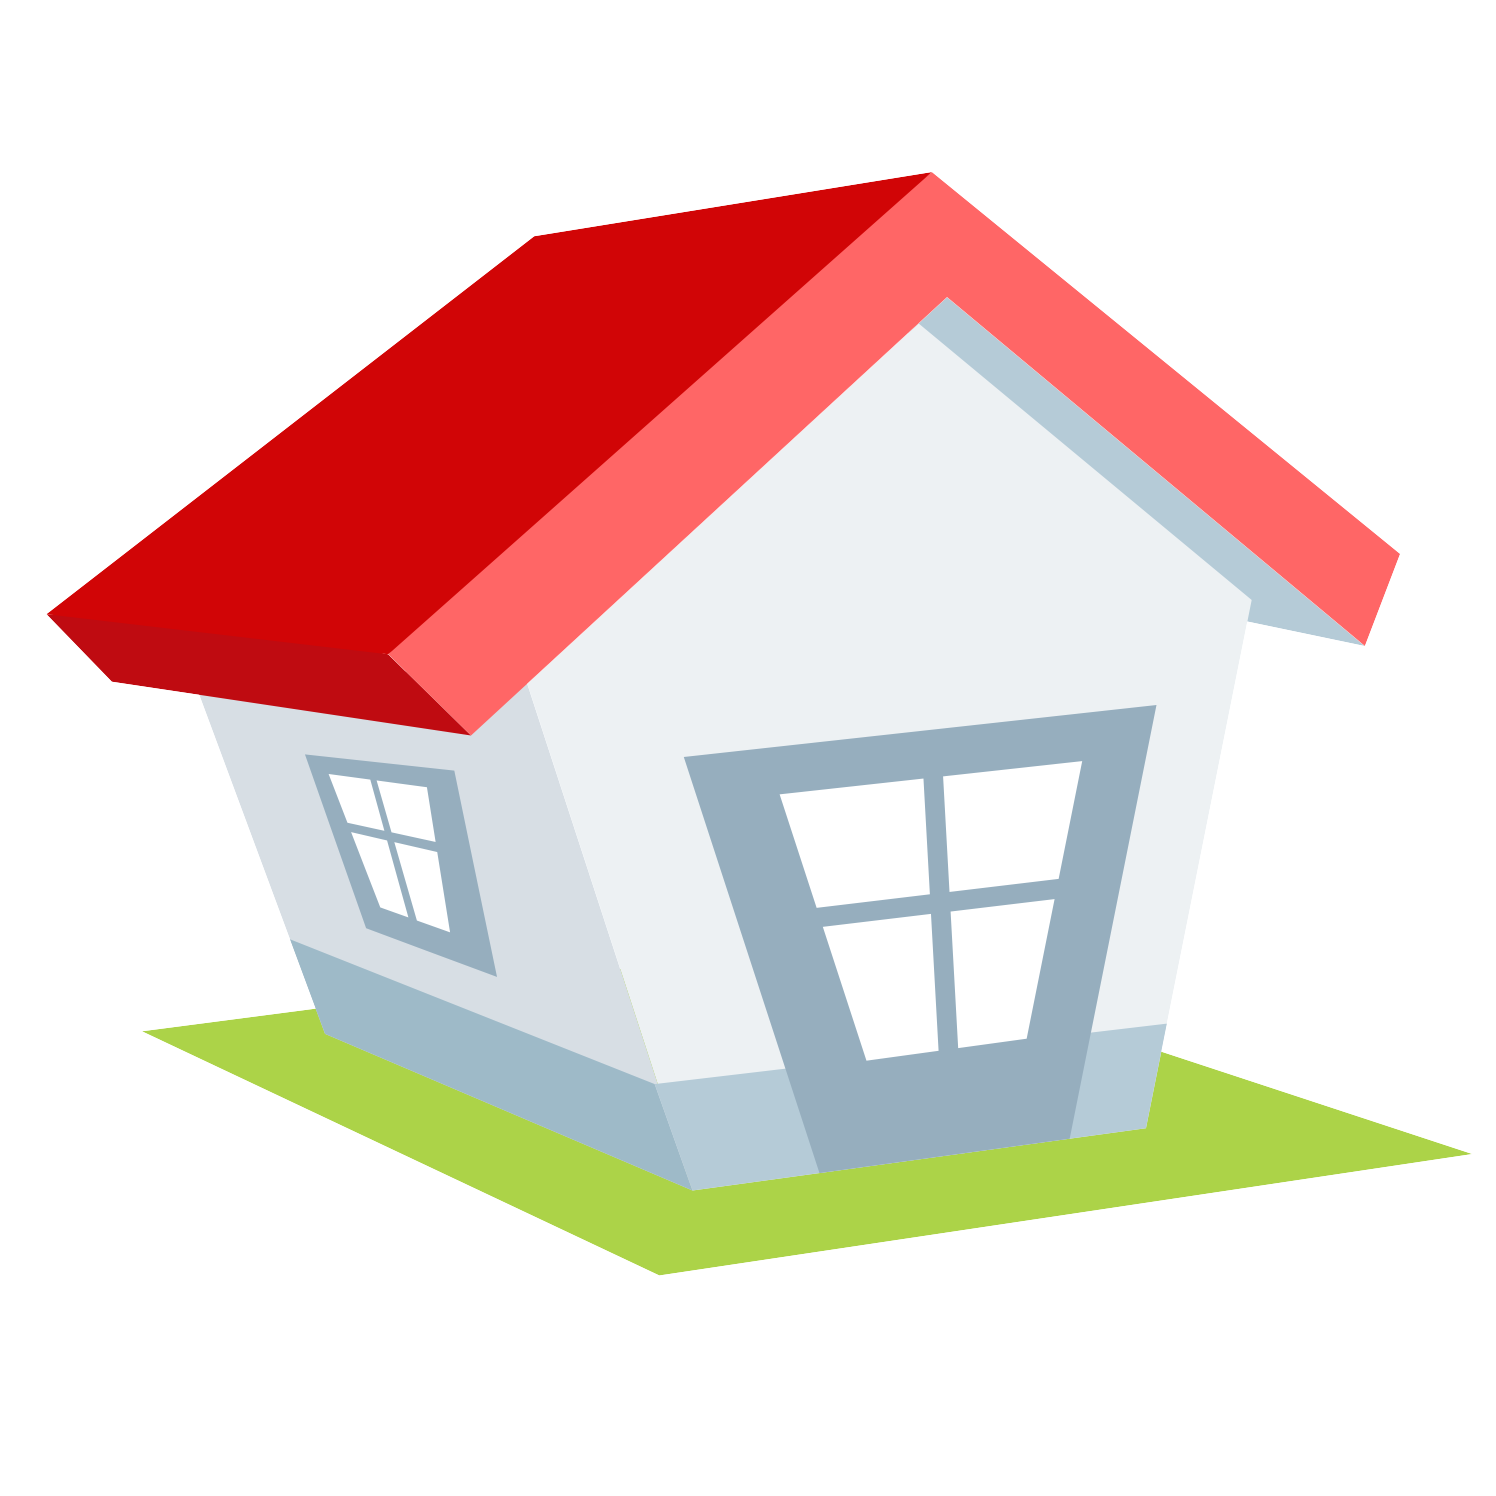 Cute House Illustration - Free Clipart Images